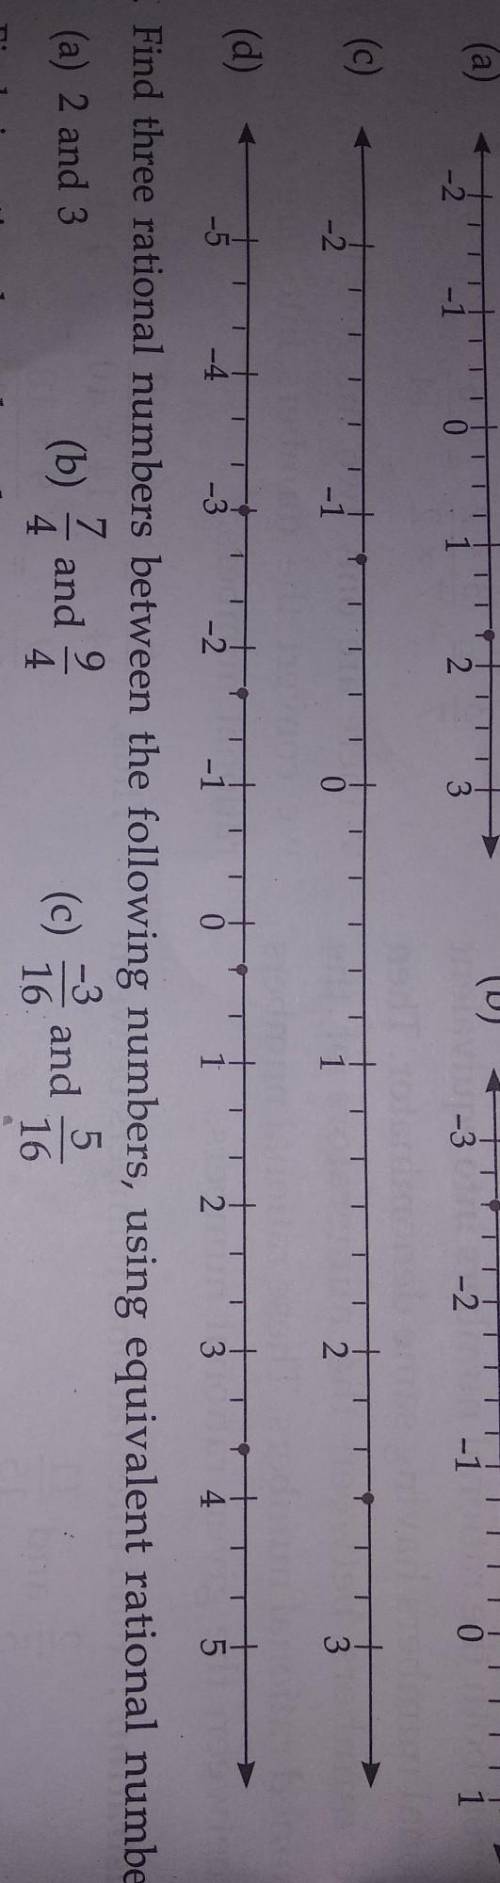 Please help me

please help me out with these (a) I don't know how to solve this (a) 2 and 3​